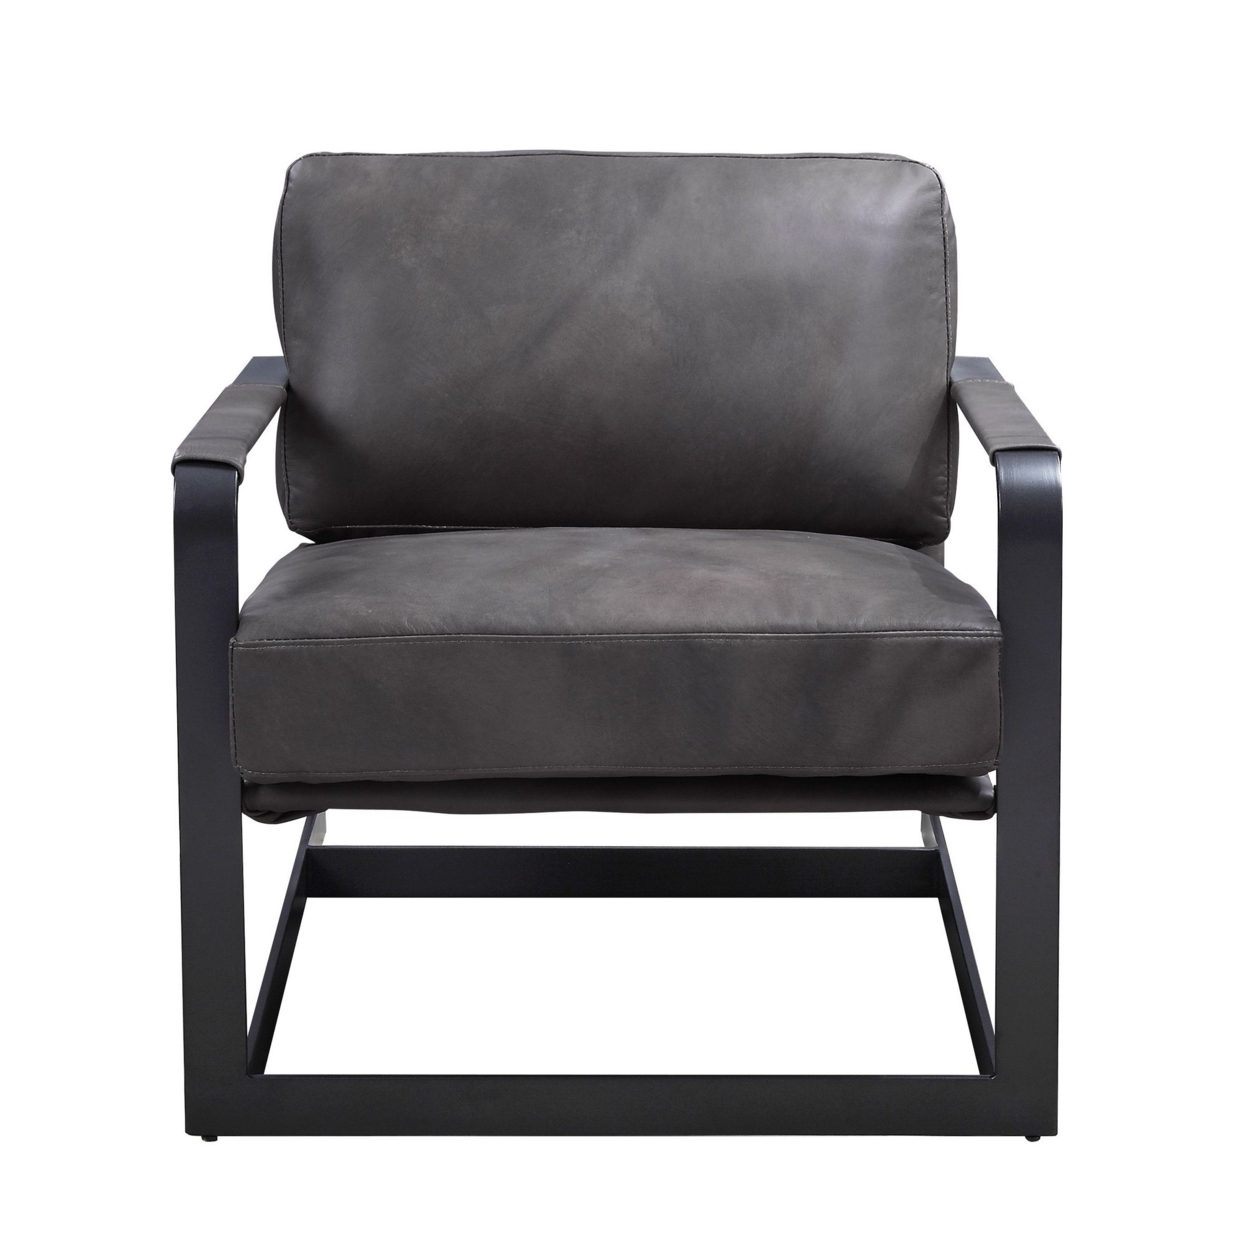 Accent Chair With Leatherette Seat And Metal Frame, Gray- Saltoro Sherpi